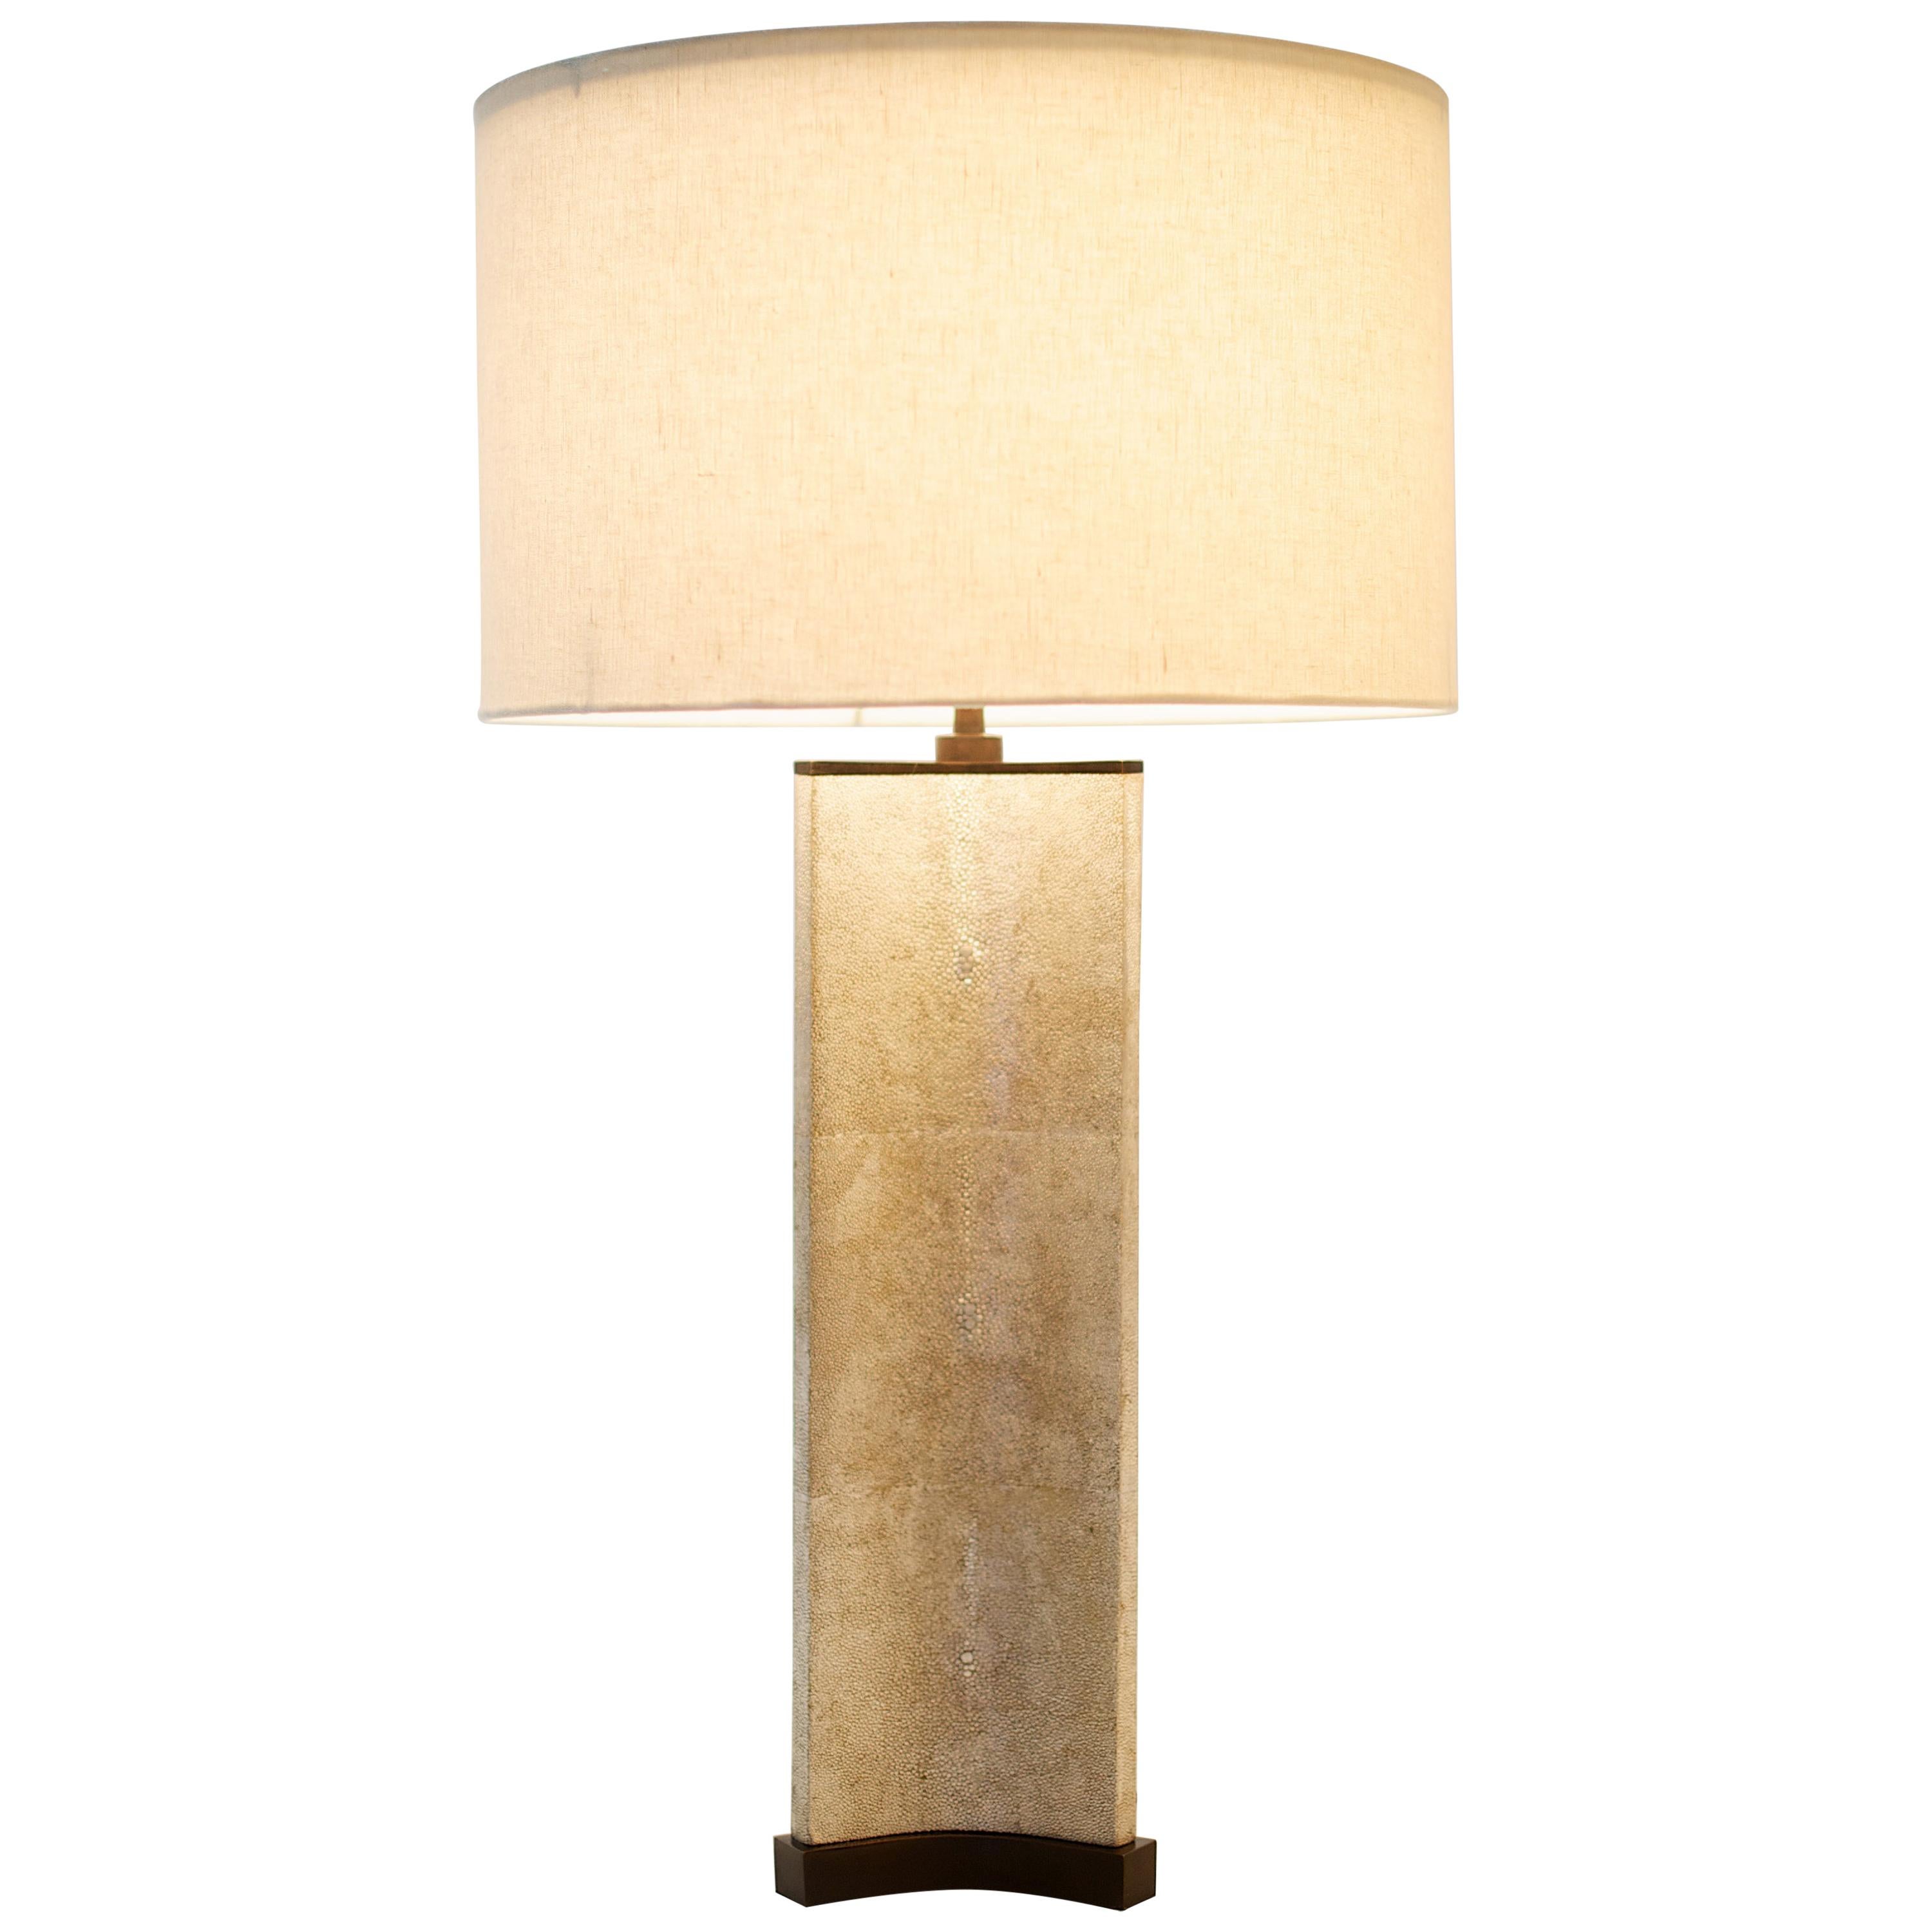 Large Bruno Lamp in Shagreen and Bronze by Elan Atelier